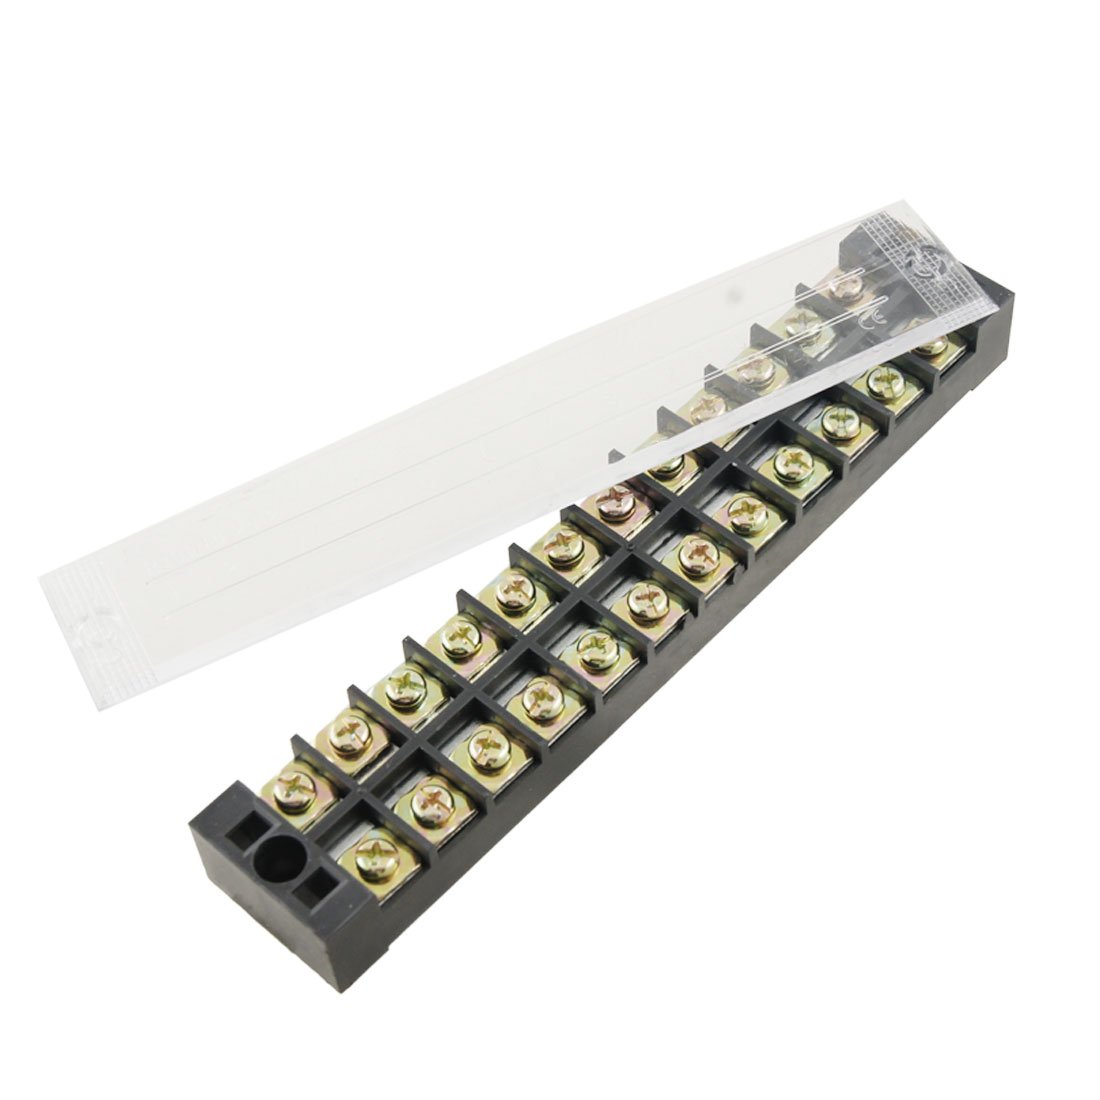 Double-Rows-12-Position-Covered-Barrier-Block-Terminal-Strip-600V-25A.jpg